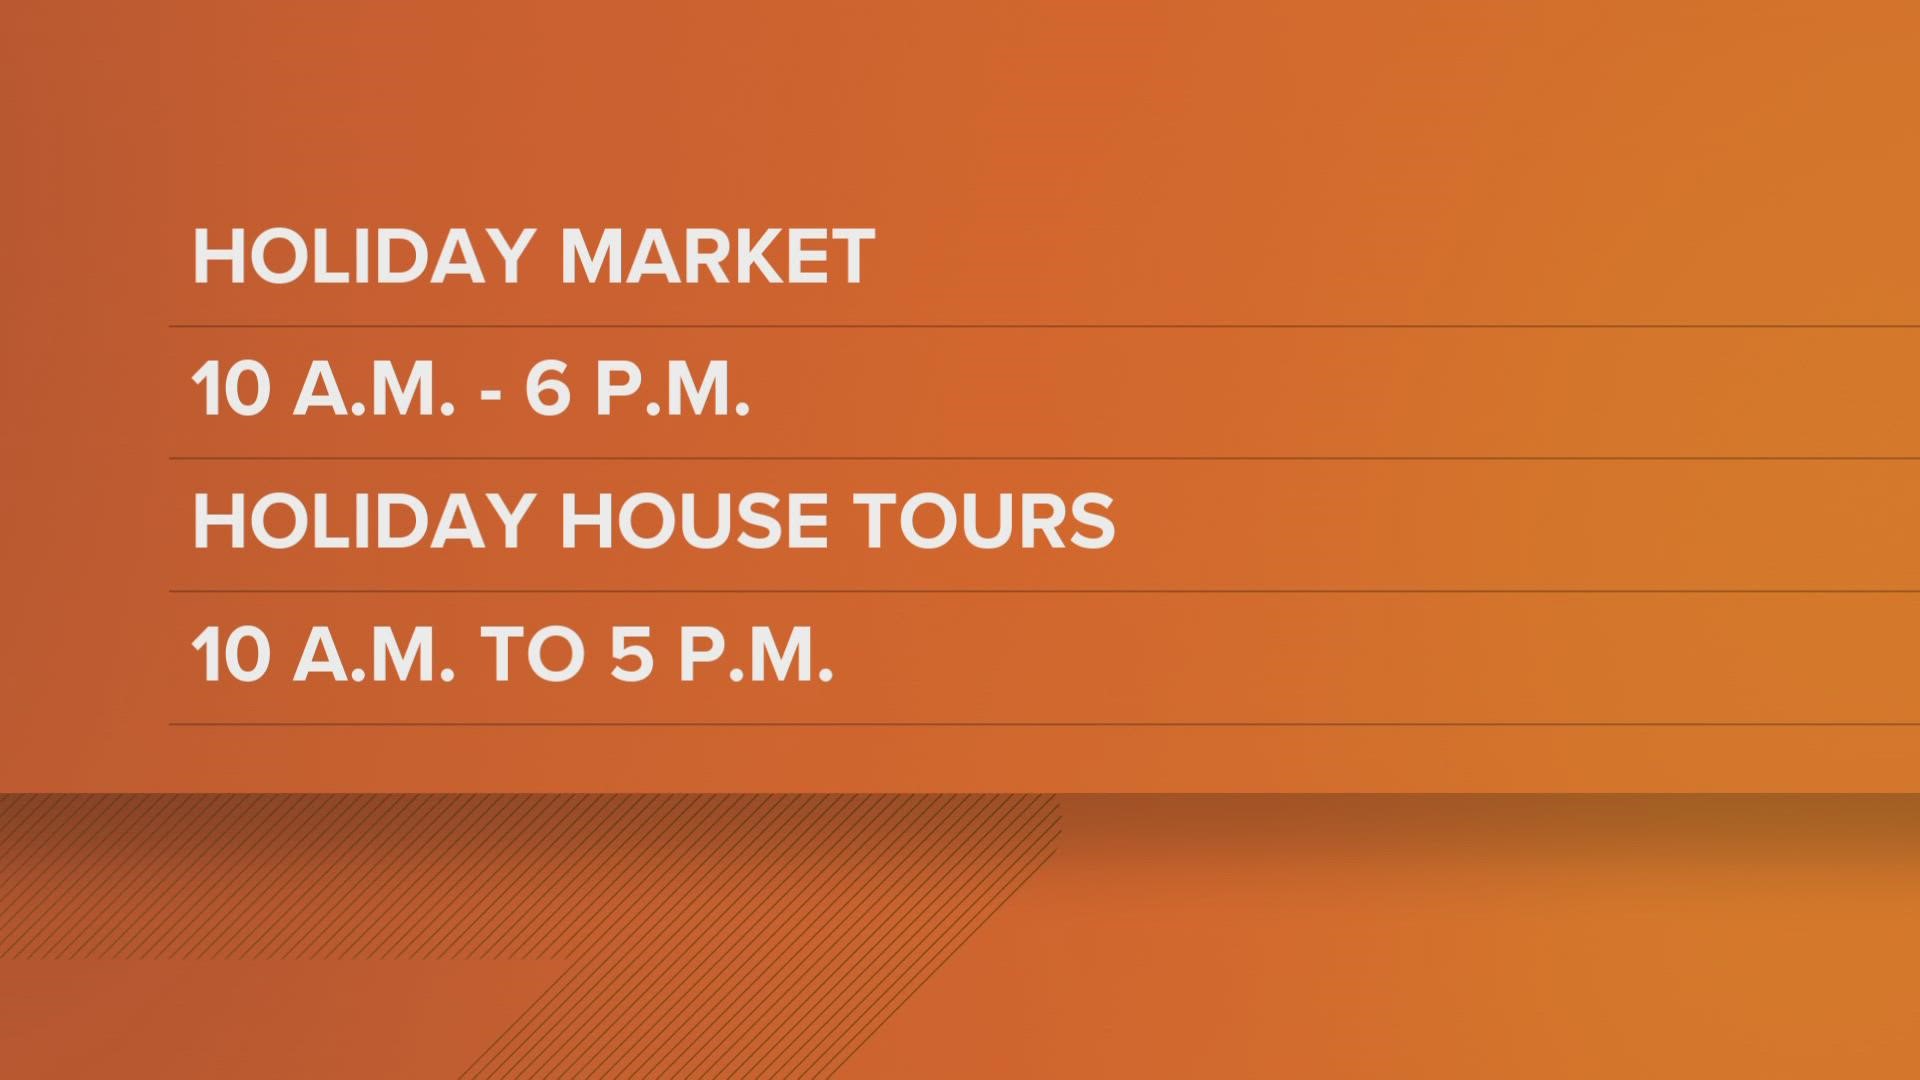 Stop by Lafayette Square Sunday to shop local and get tickets to tour the beautiful historic homes of the neighborhood! Holiday Market runs from 10 a.m. - 6 p.m.